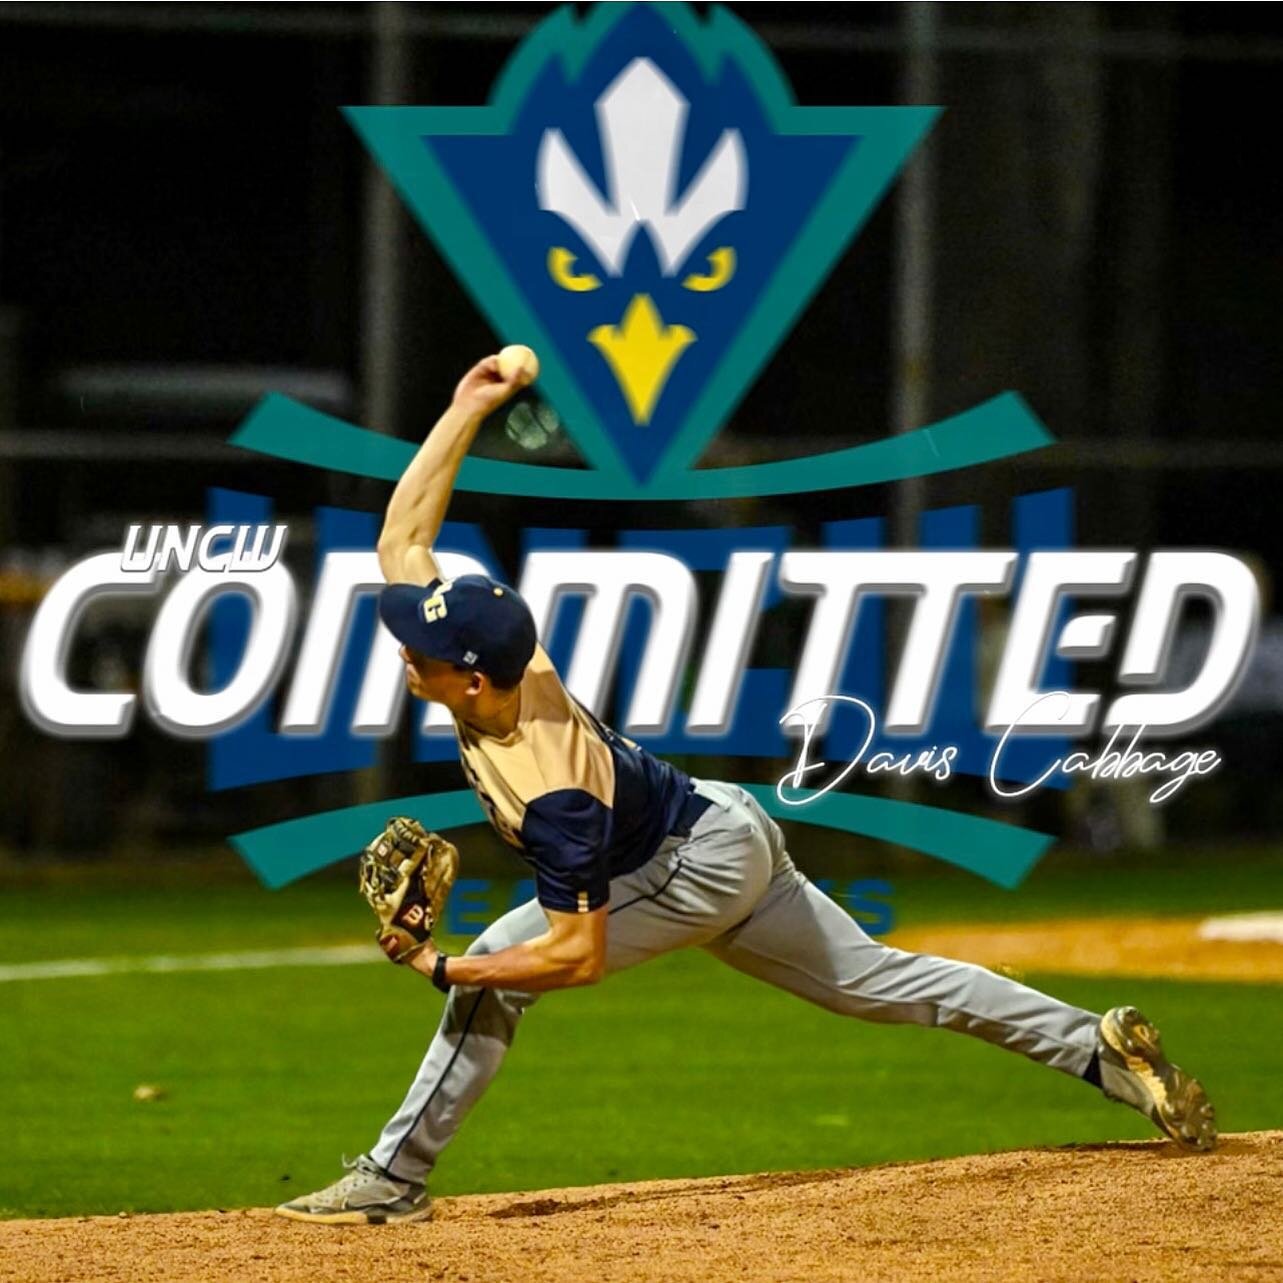 🚨🚨 COMMITTED 🚨🚨 
Help us shoutout @davis_cabbage on his commitment to play baseball at the next level for UNCW! 🔥

UNC Wilmington is getting an all around DUDE both on and off the field. We are proud of his growth, development, and commitment to